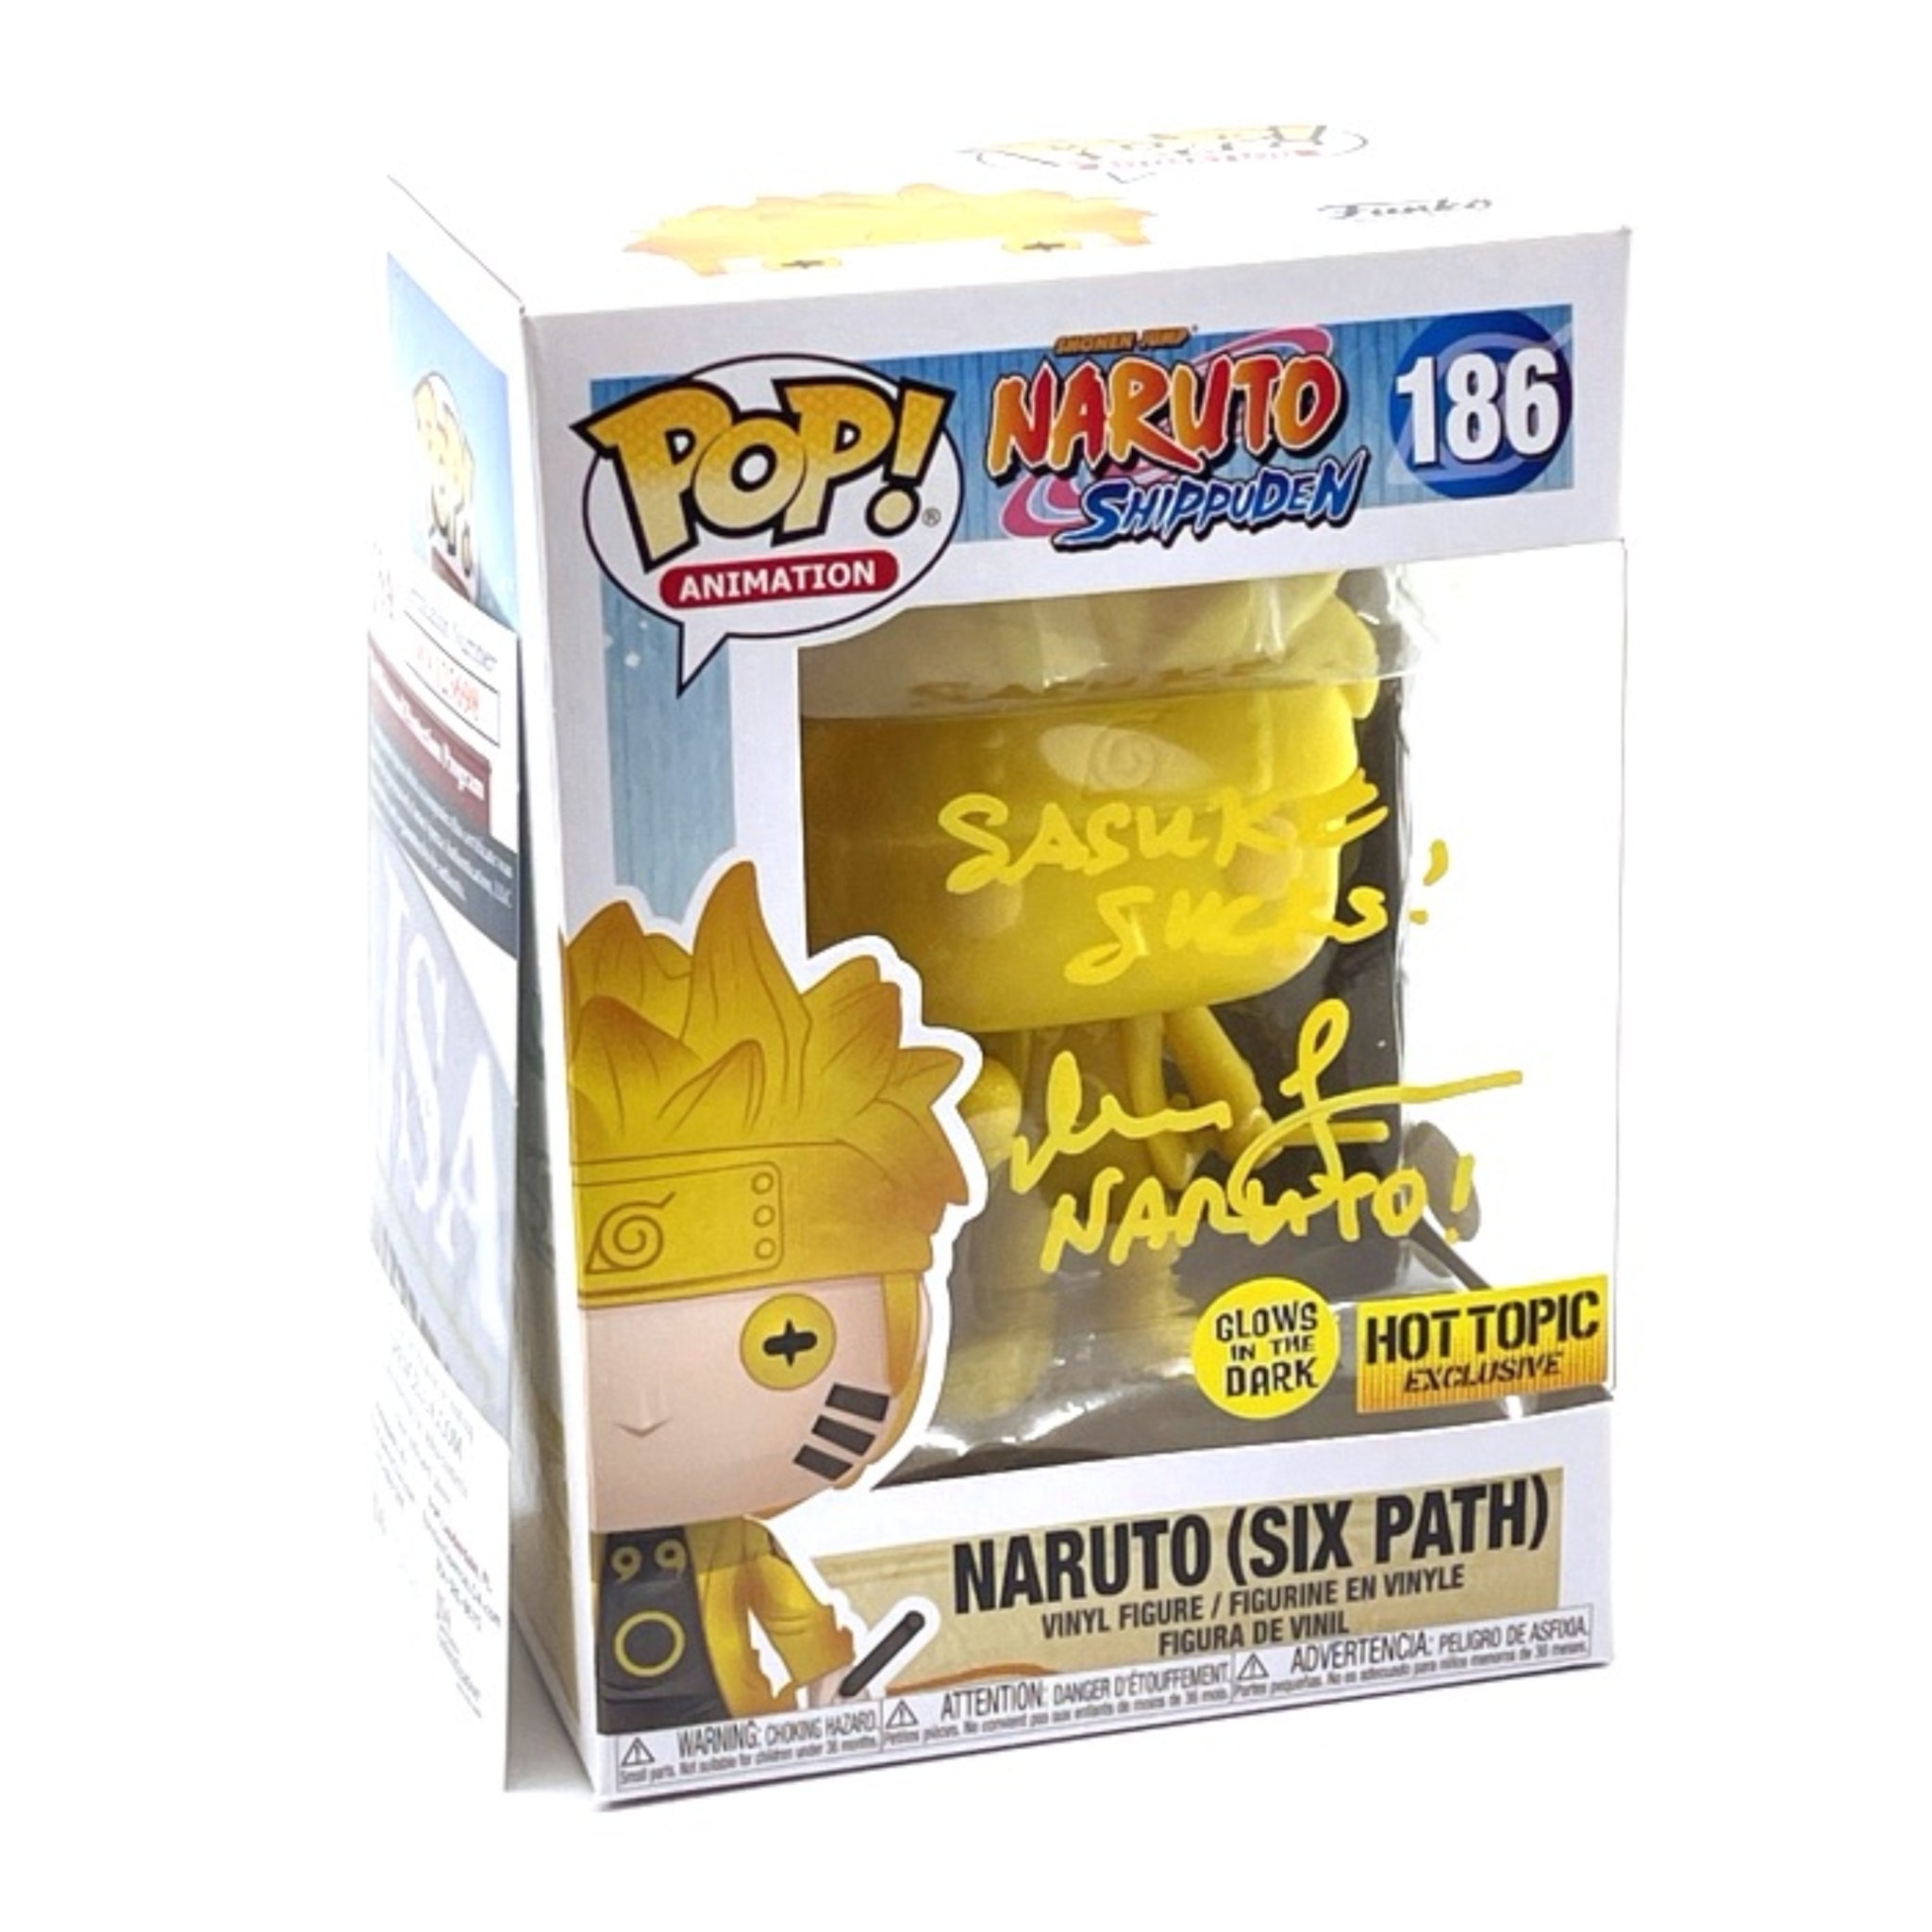 Naruto (Six Path) (SIGNED W/ AUTHENTICATION) GITD Funko Pop! HOT TOPIC EXCLUSIVE